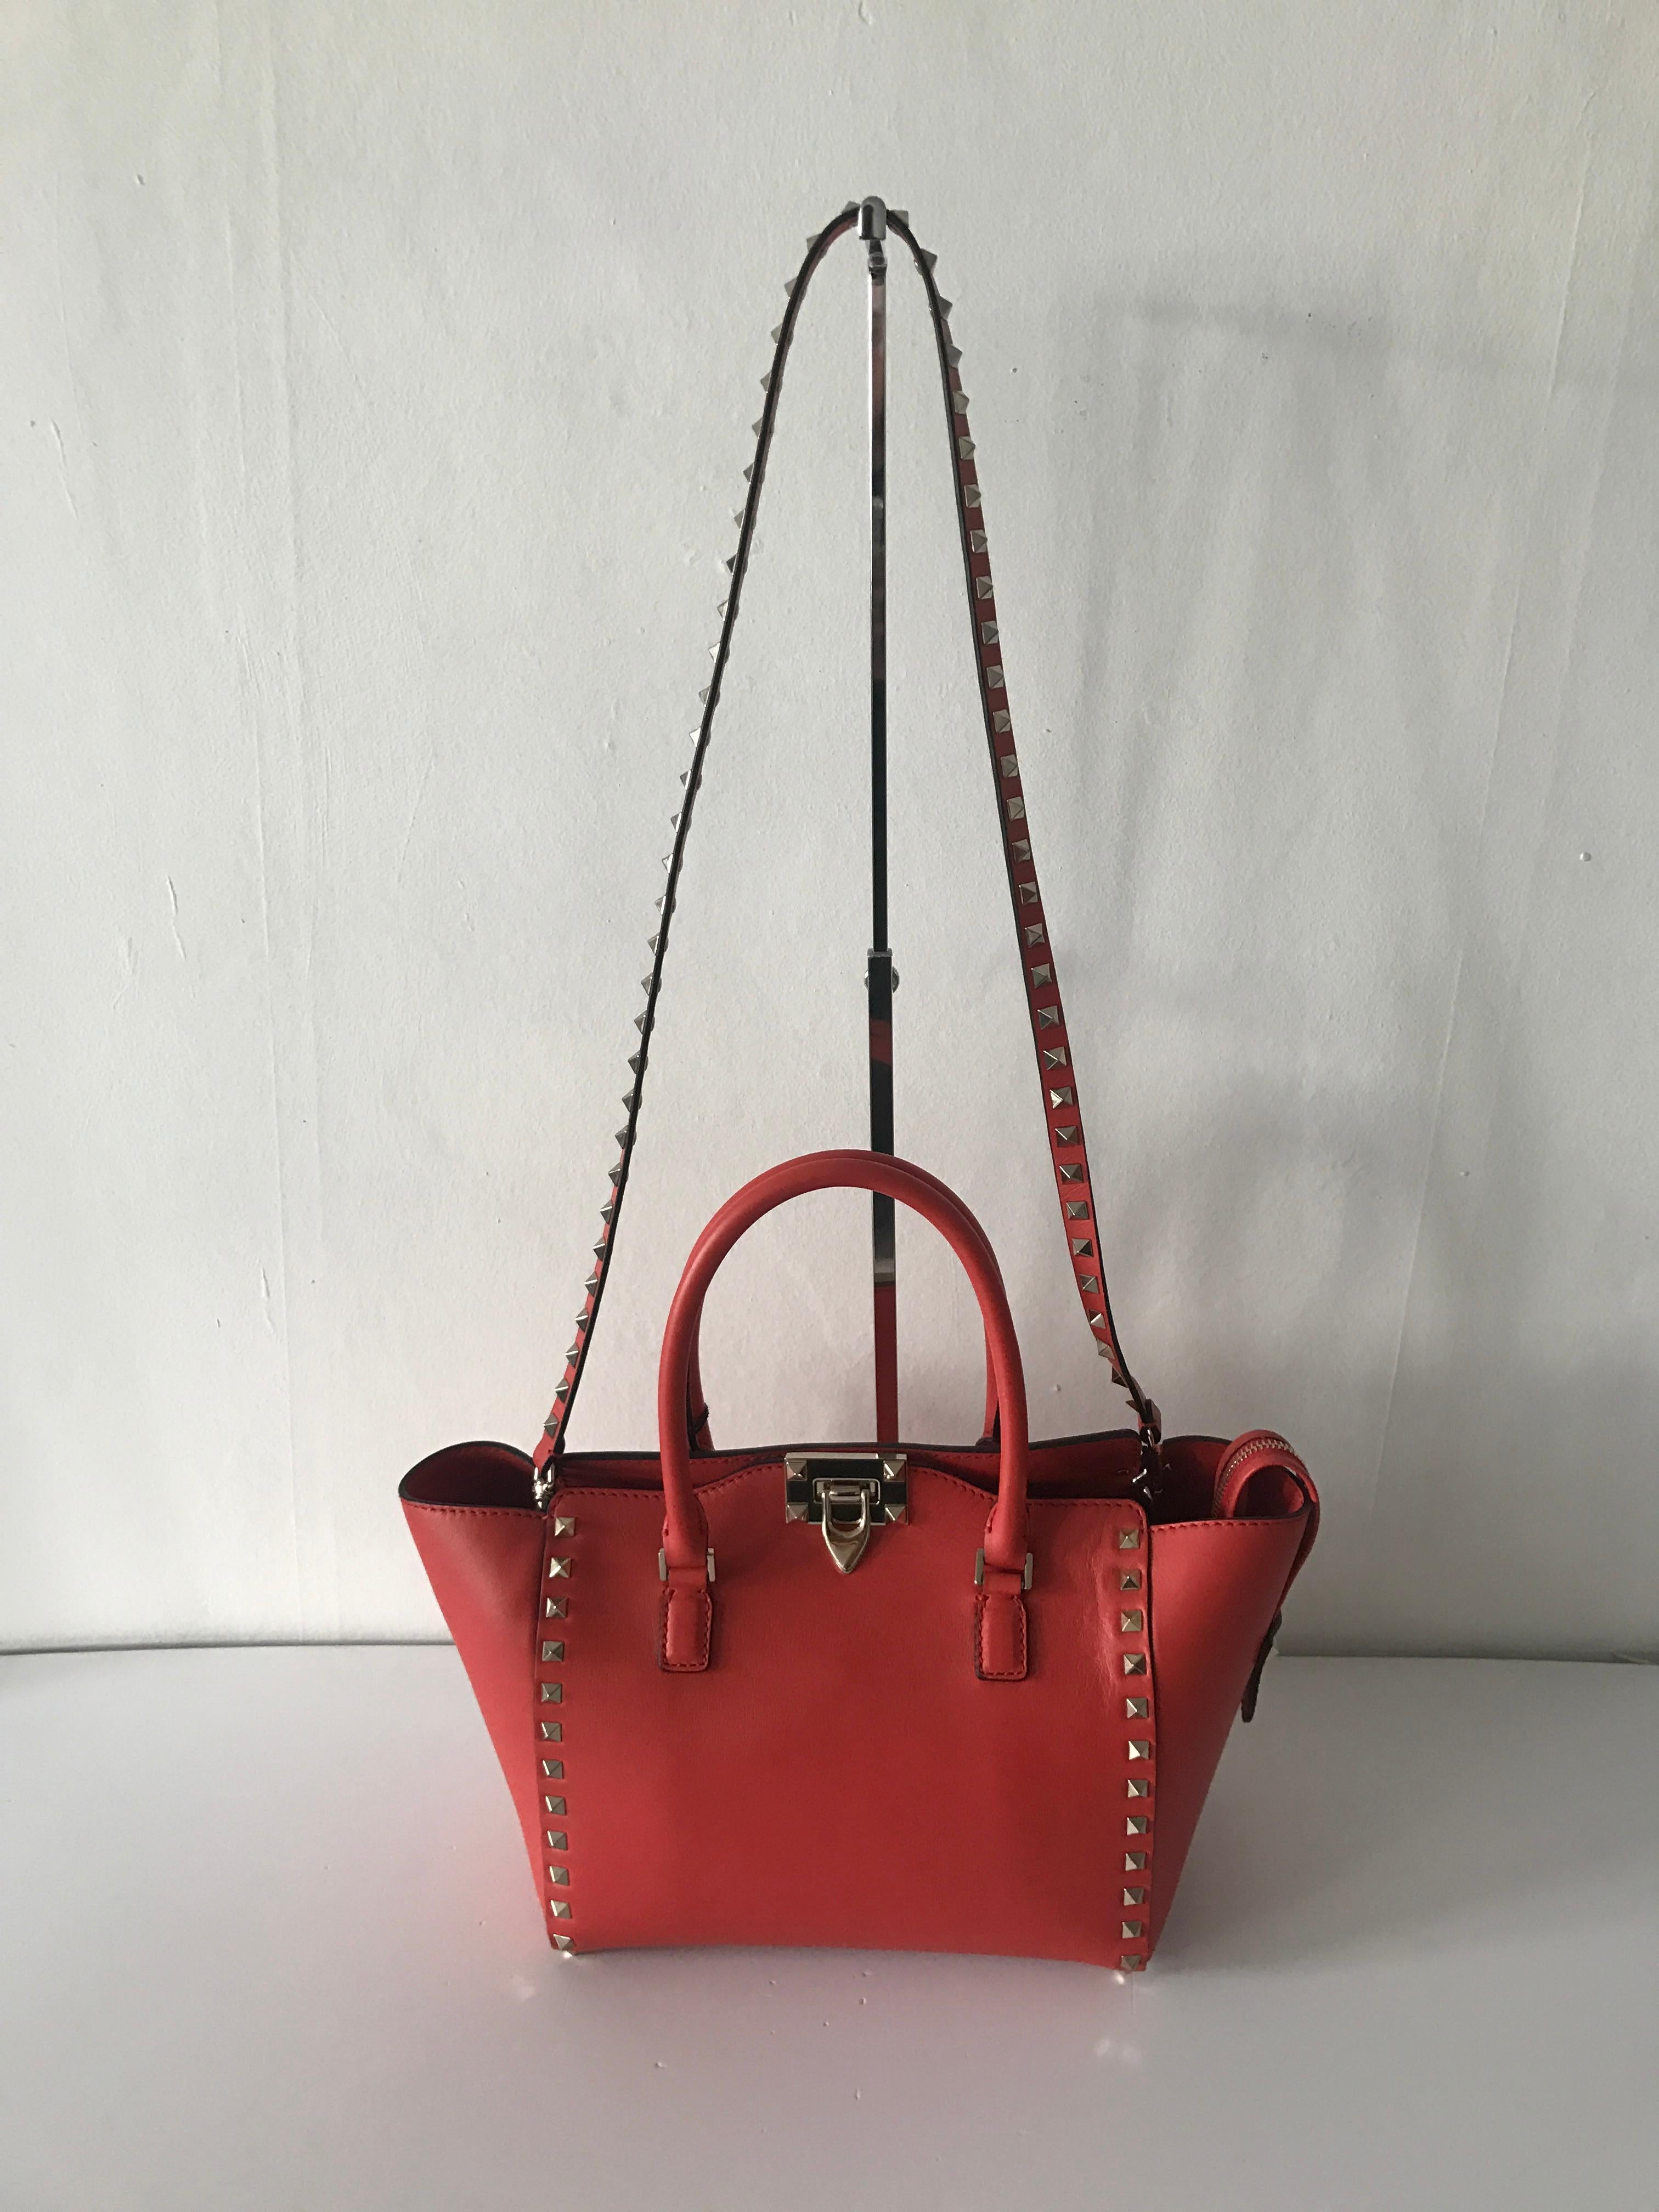 This Rockstud Small Double Handle tote from Valentino perfectly blends Italian elegance with contemporary detailing. This handbag is a bold statement in the cherry red colour. The Rockstud Small Double Handle toe features round top handles, a